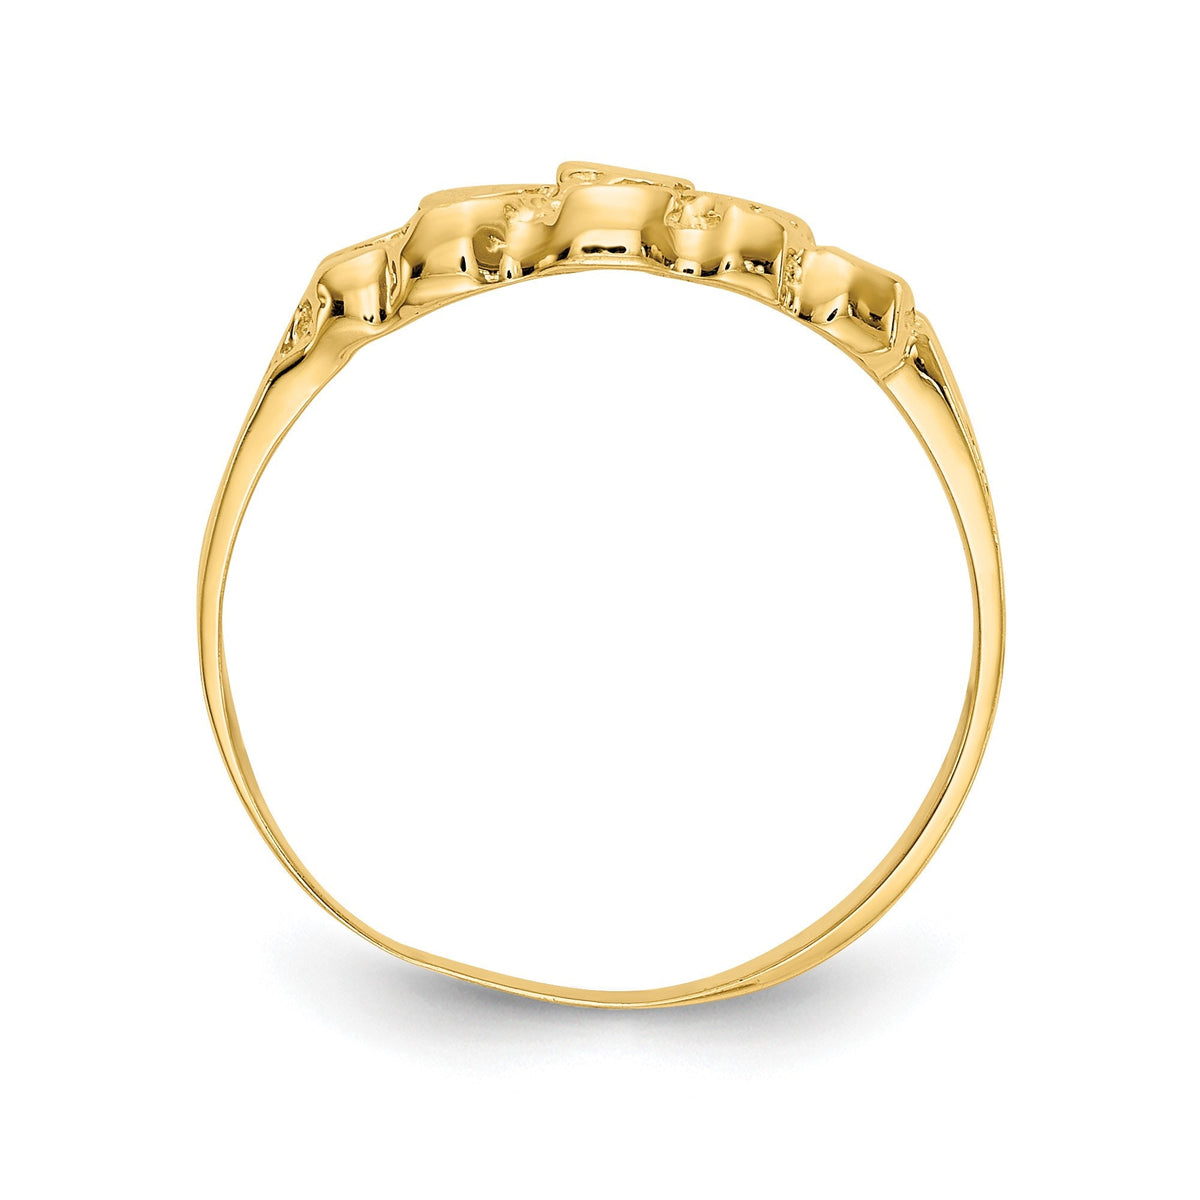 Womens 14k Gold Nugget Ring Band available in 14k Yellow Gold 2.1 Grams (Not Plated or Filled) Gift Box Included - Made in USA